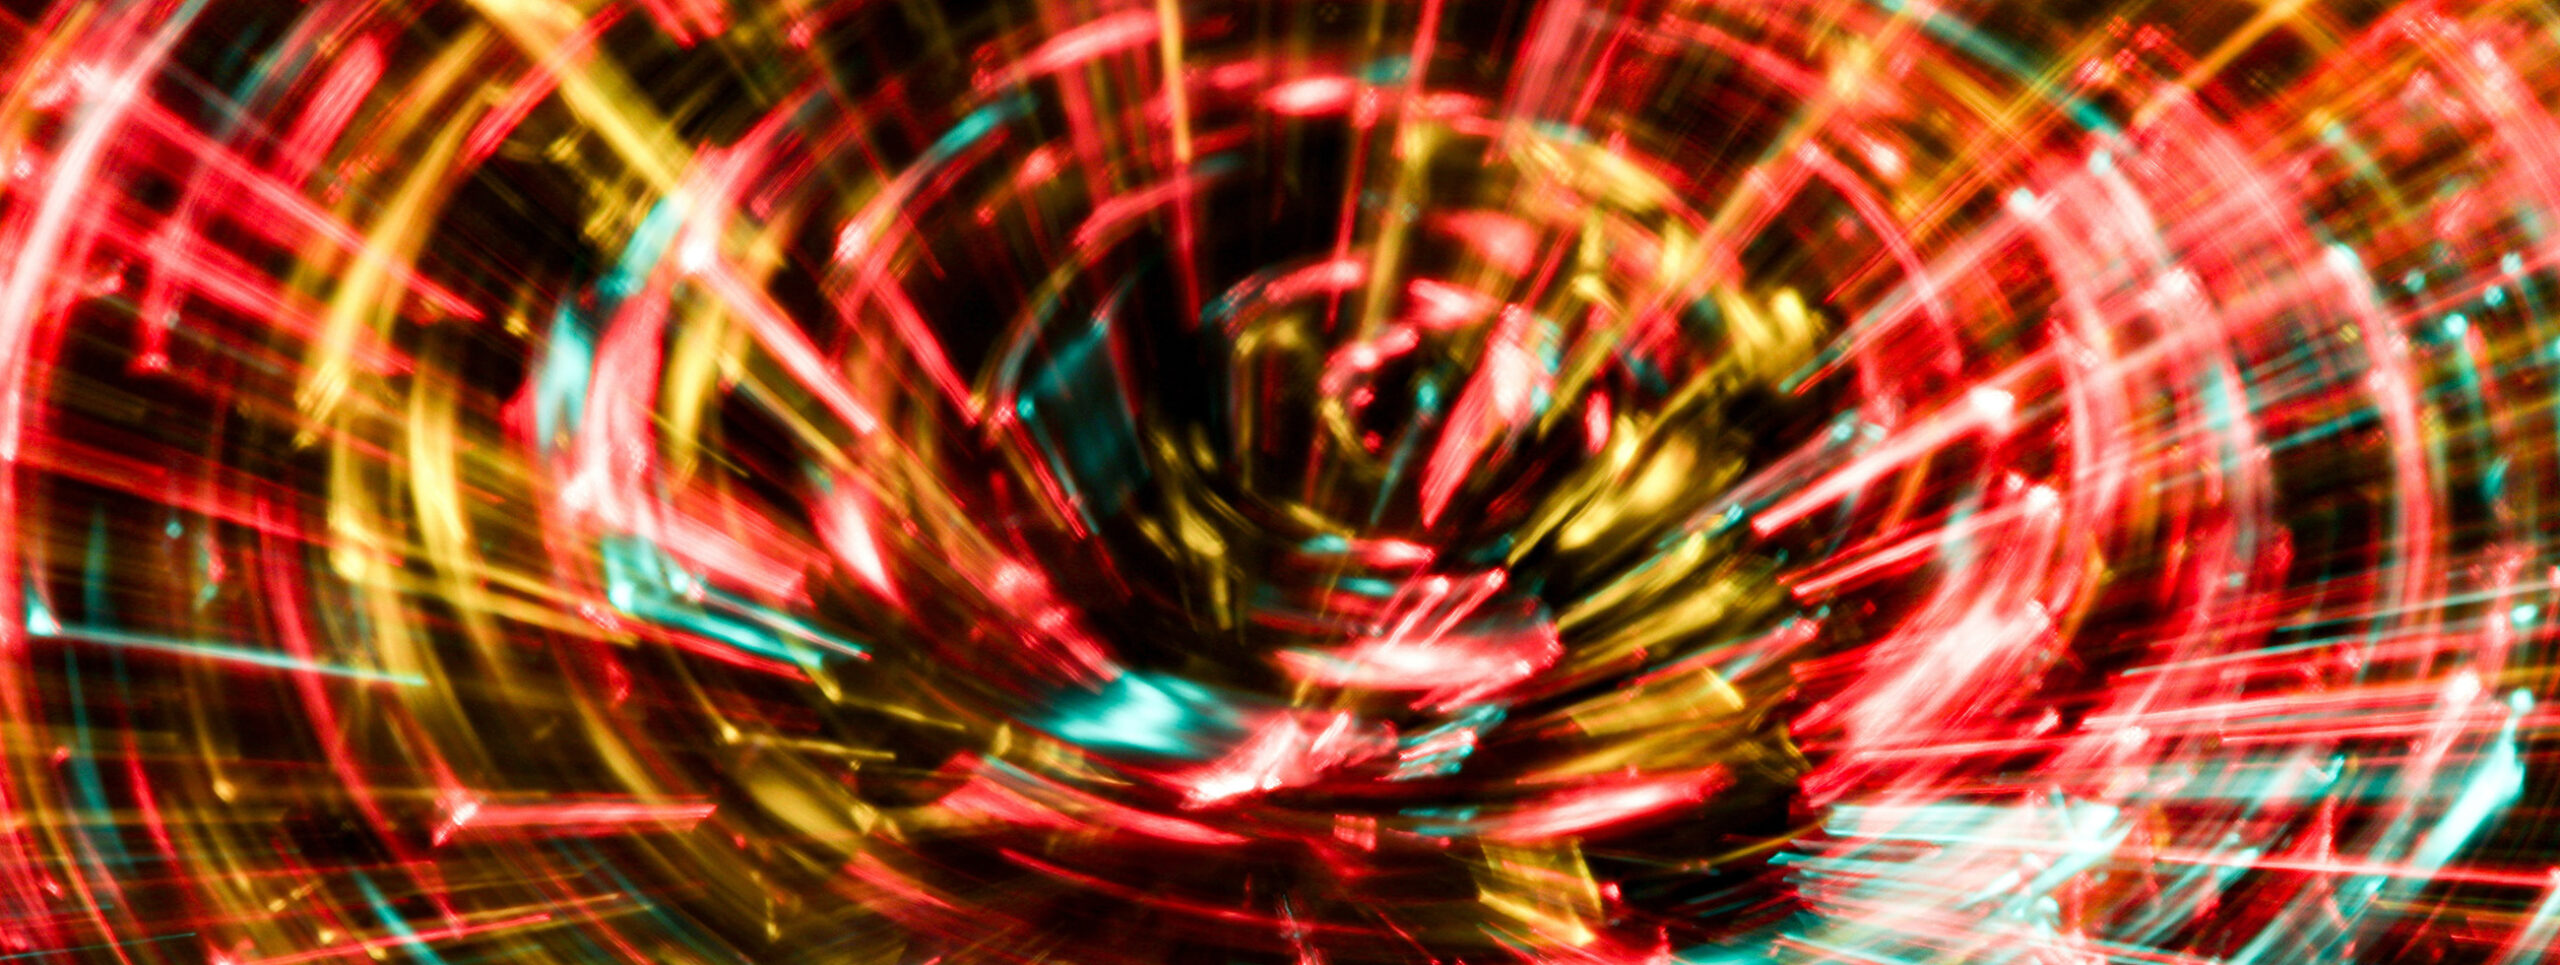 Colored lights swirling